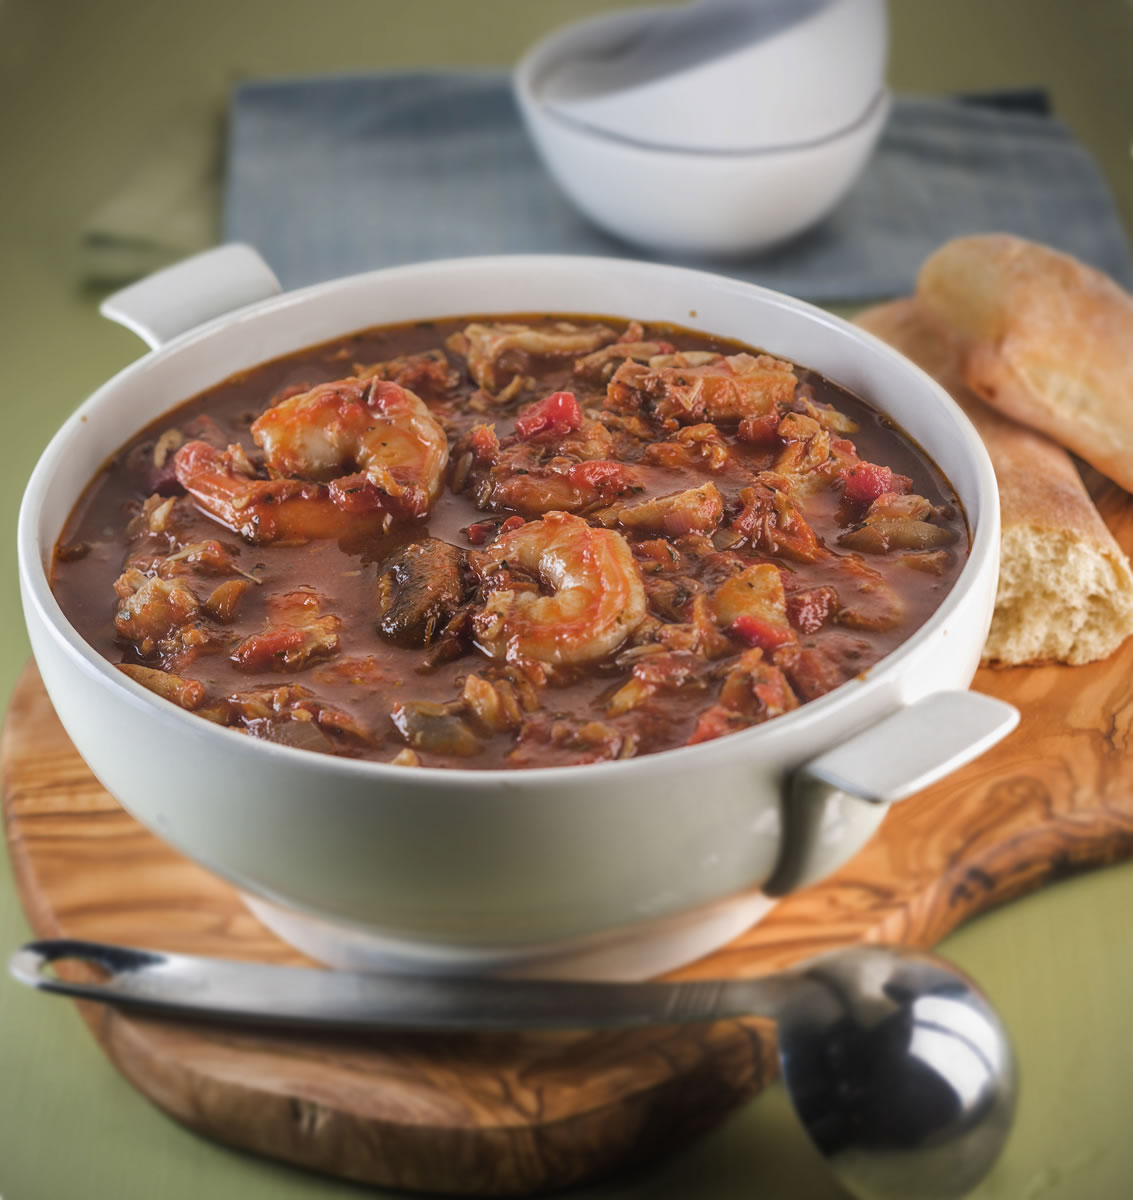 That Italian-American seafood stew Cioppino can be made into an easy weeknight meal with just a few simple tweaks to the recipe.